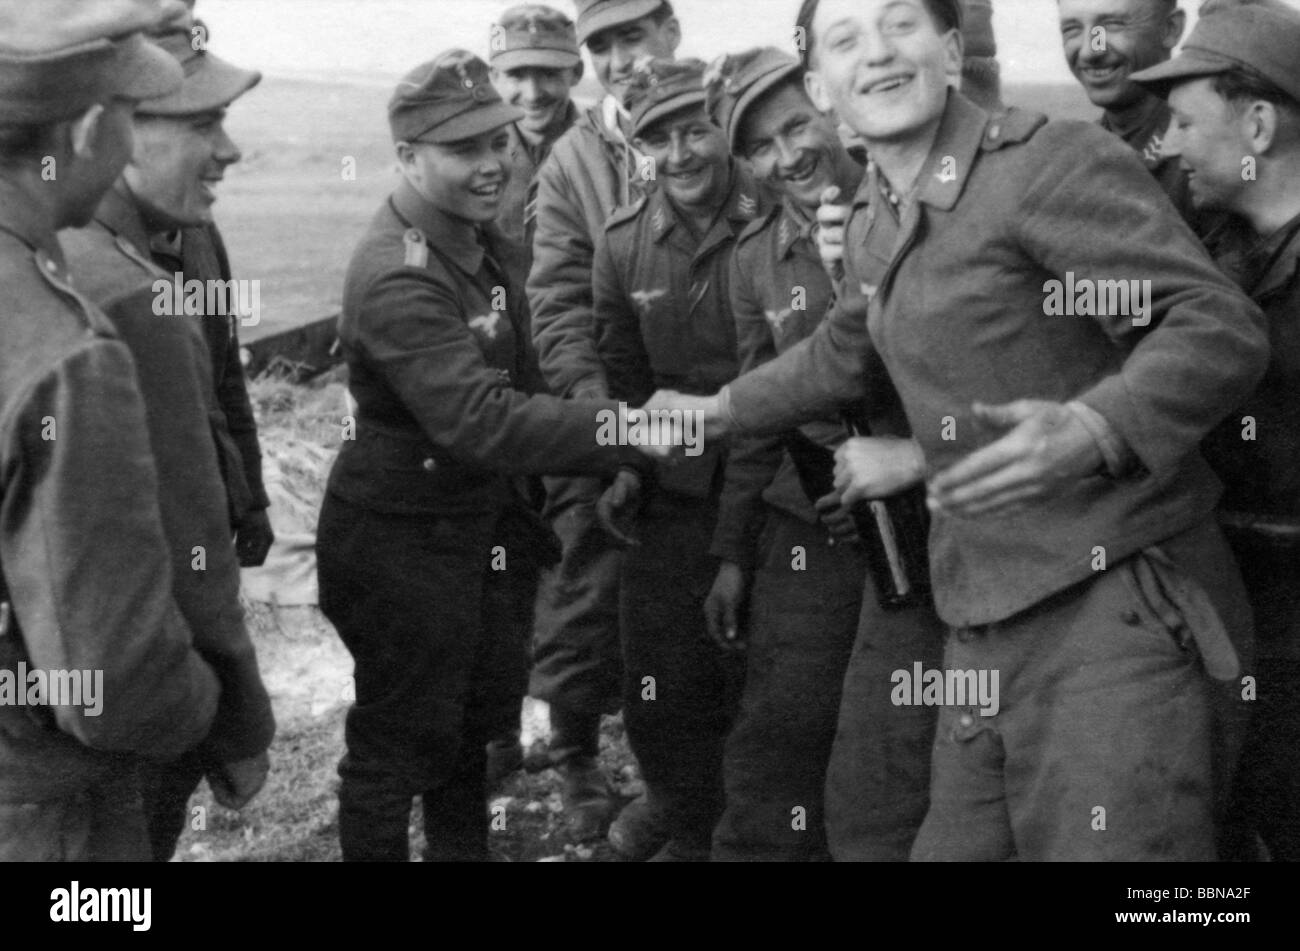 events, Second World War / WWII, Russia 1944 / 1945, Crimea, Sevastopol, soldiers of a Luftwaffe anti-aircraft unit congratulating a comrade on the award of a medal, 30.4.1944, Eastern Front, USSR, Wehrmacht, 20th century, historic, historical, Soviet Union, AA, joy, handshake, shaking hands, laughing, 1940s, people, Stock Photo